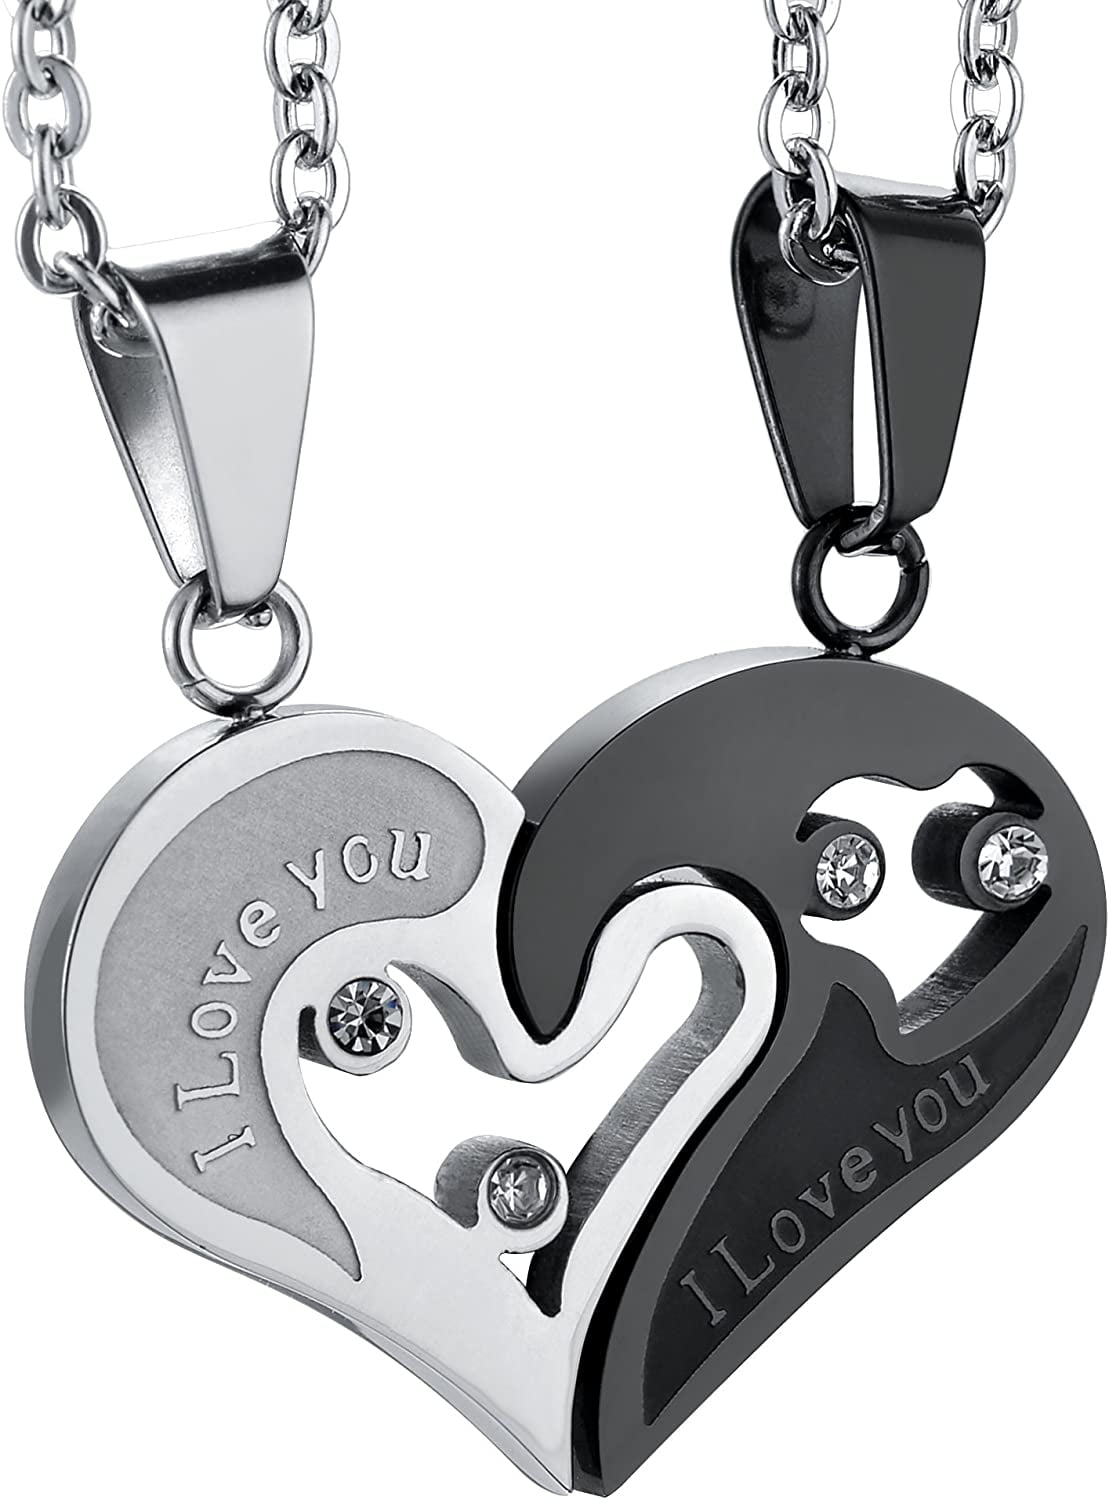 Women 2PC Heart Stainless Charm Chain Hot Lover Wings Pendant Necklace Steel